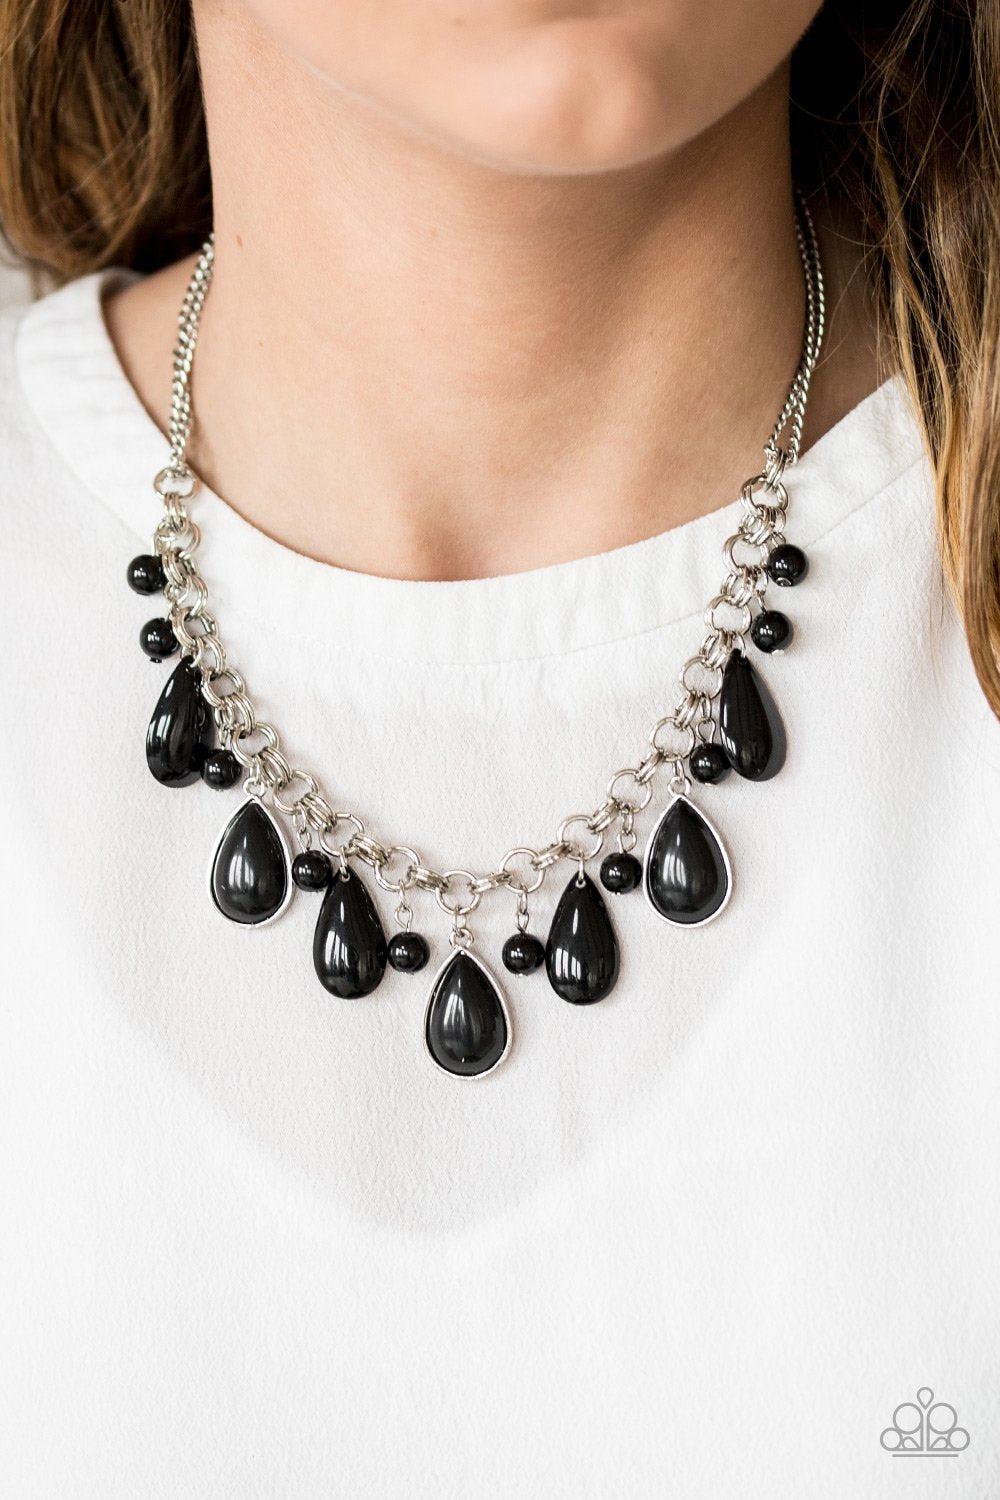 This Side Of Malibu Black Teardrop Necklace - Paparazzi Accessories-CarasShop.com - $5 Jewelry by Cara Jewels